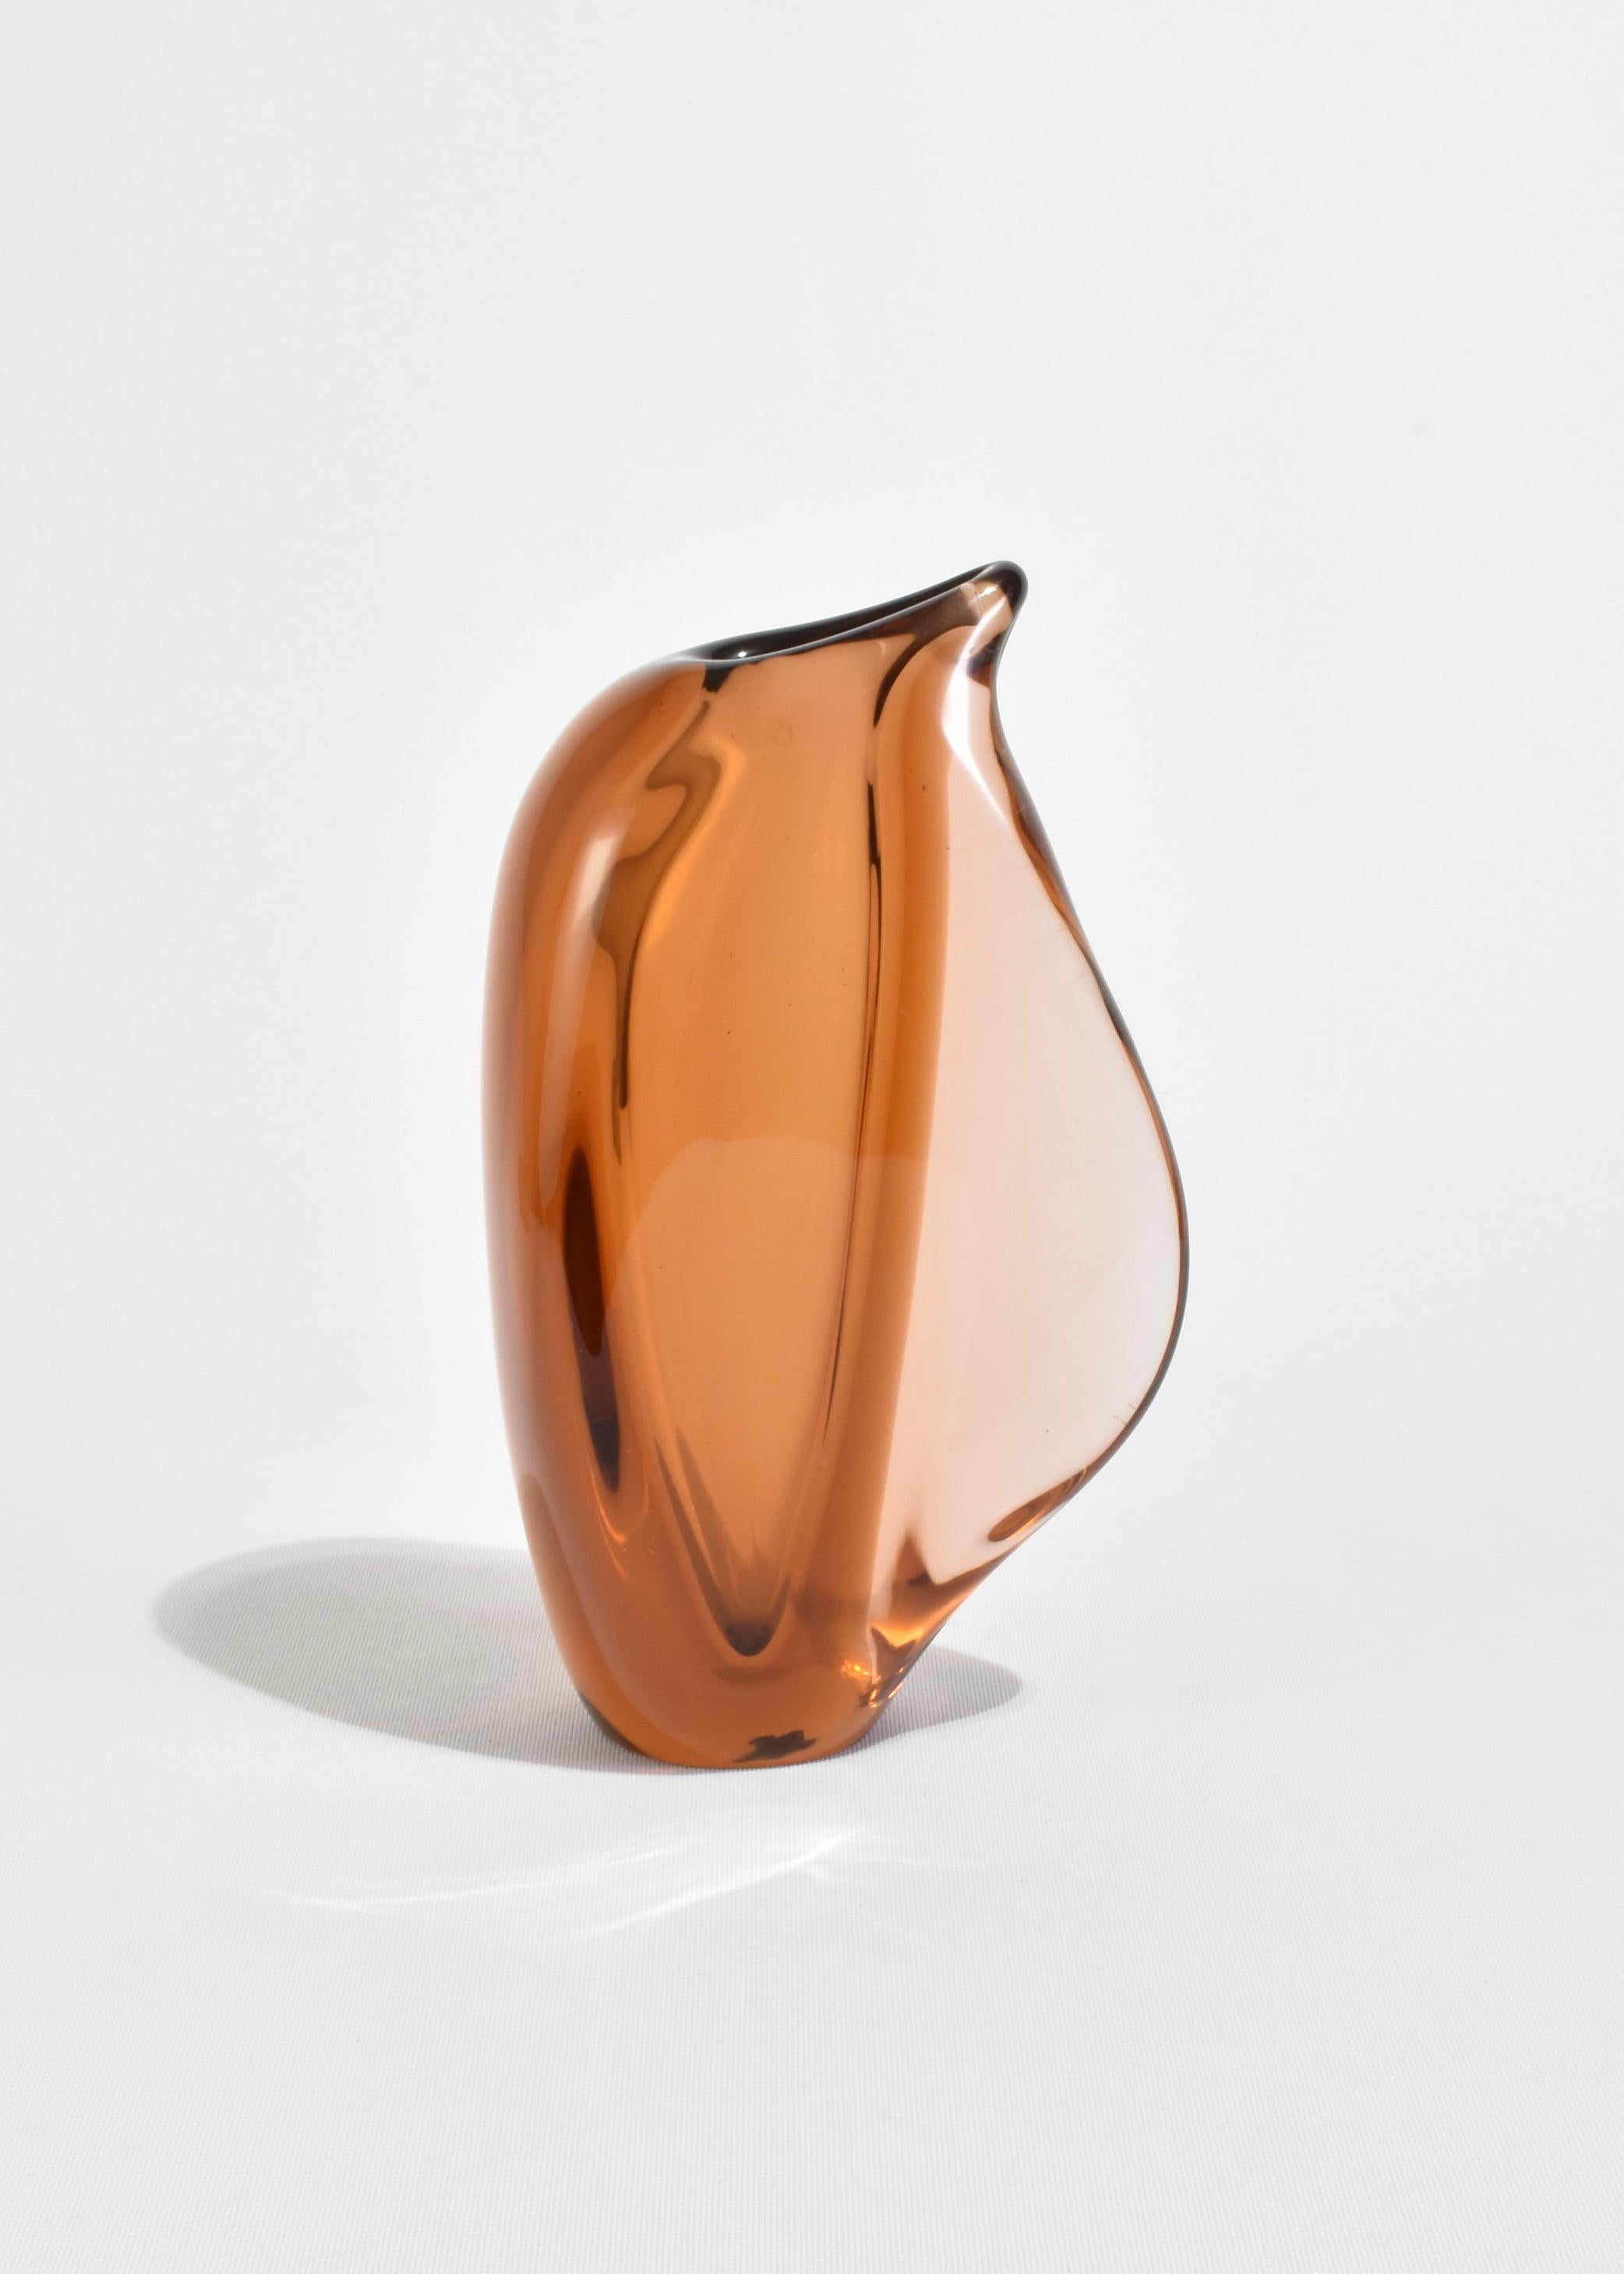 Stunning, amber glass vase with curved side detail. Made in Czechoslovakia.